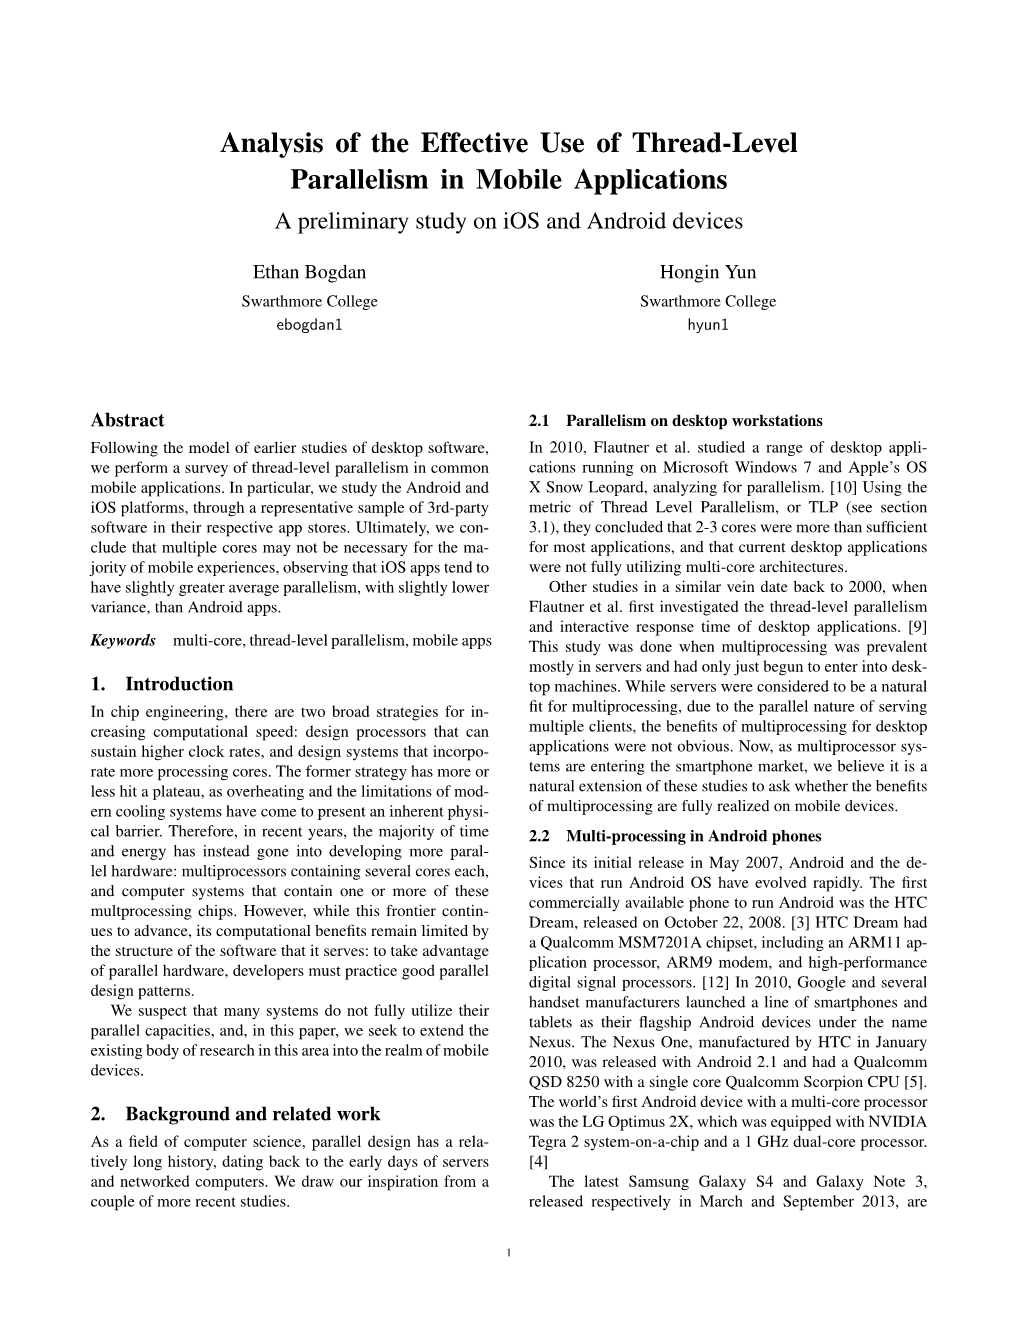 Analysis of the Effective Use of Thread-Level Parallelism in Mobile Applications a Preliminary Study on Ios and Android Devices